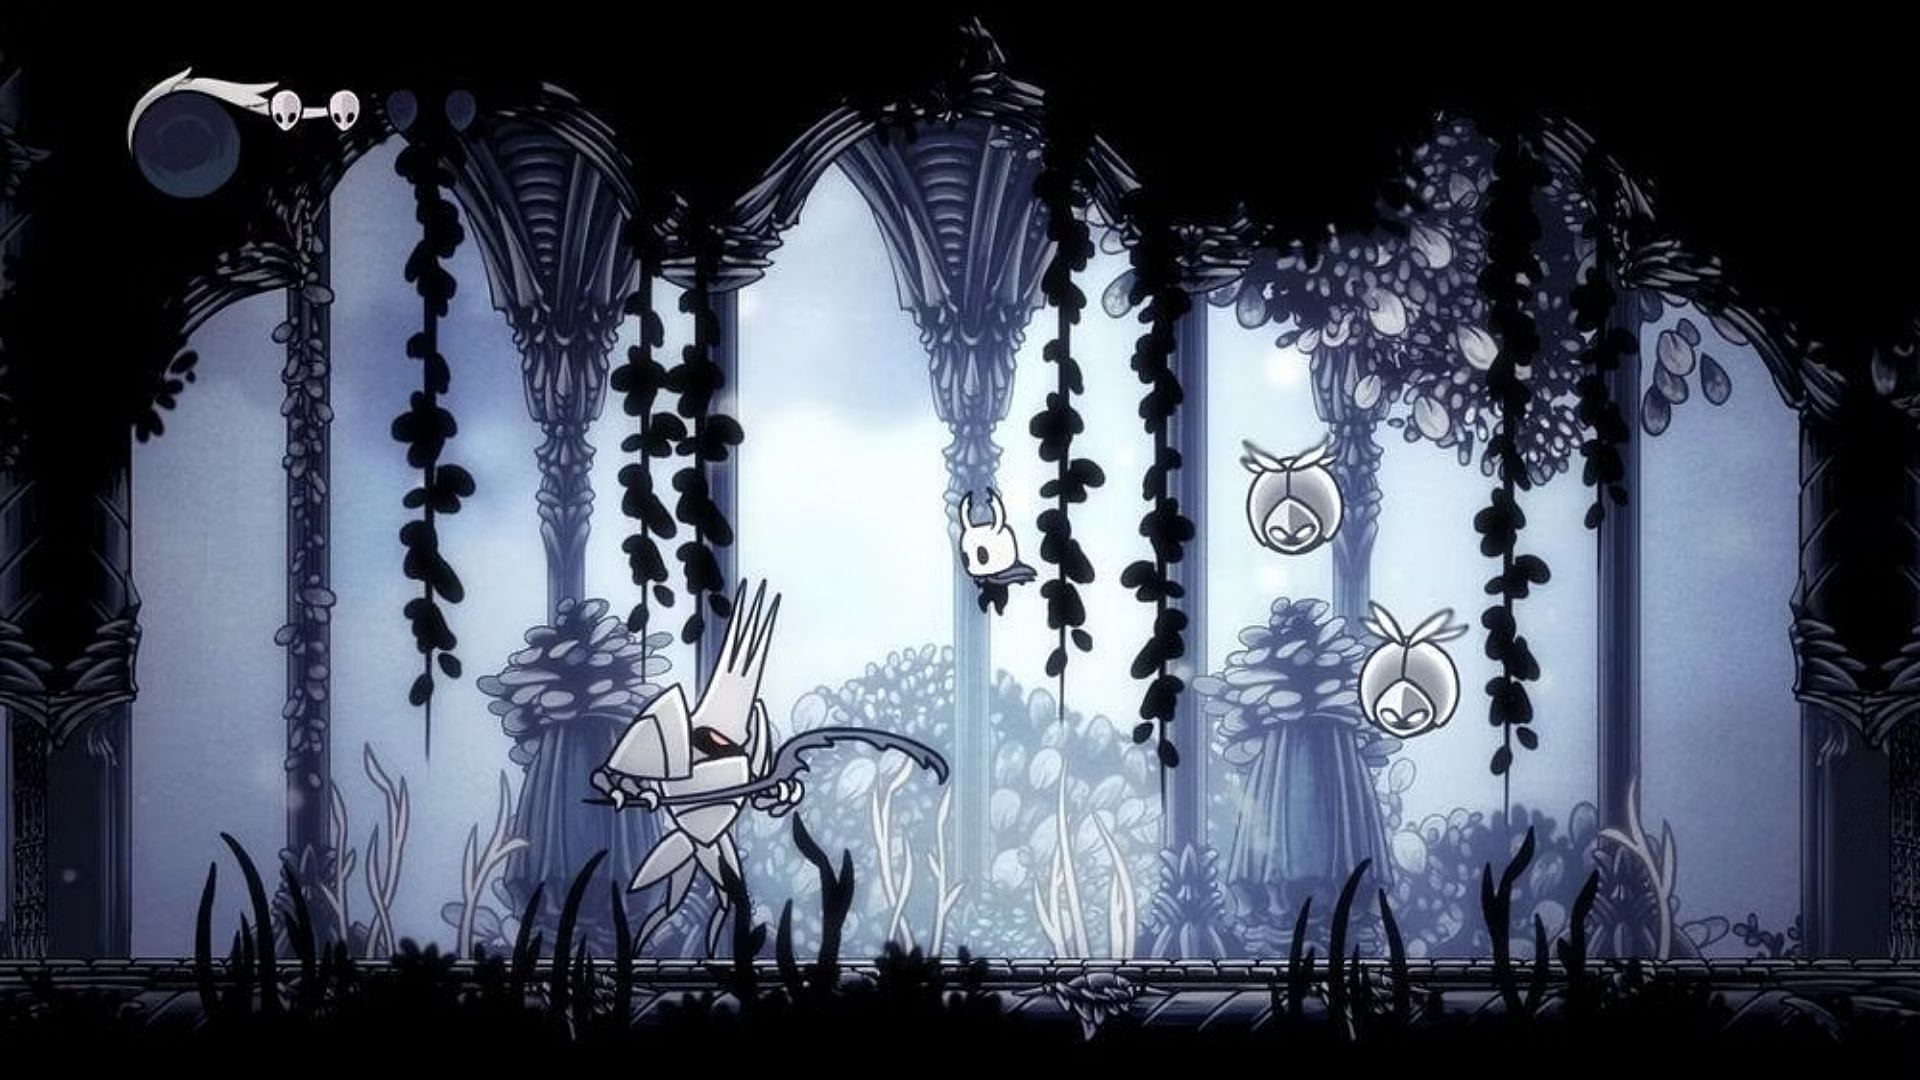 Hollow Knight provides a Souls-like experience through its world design and punishing combat. (Image via Team Cherry)